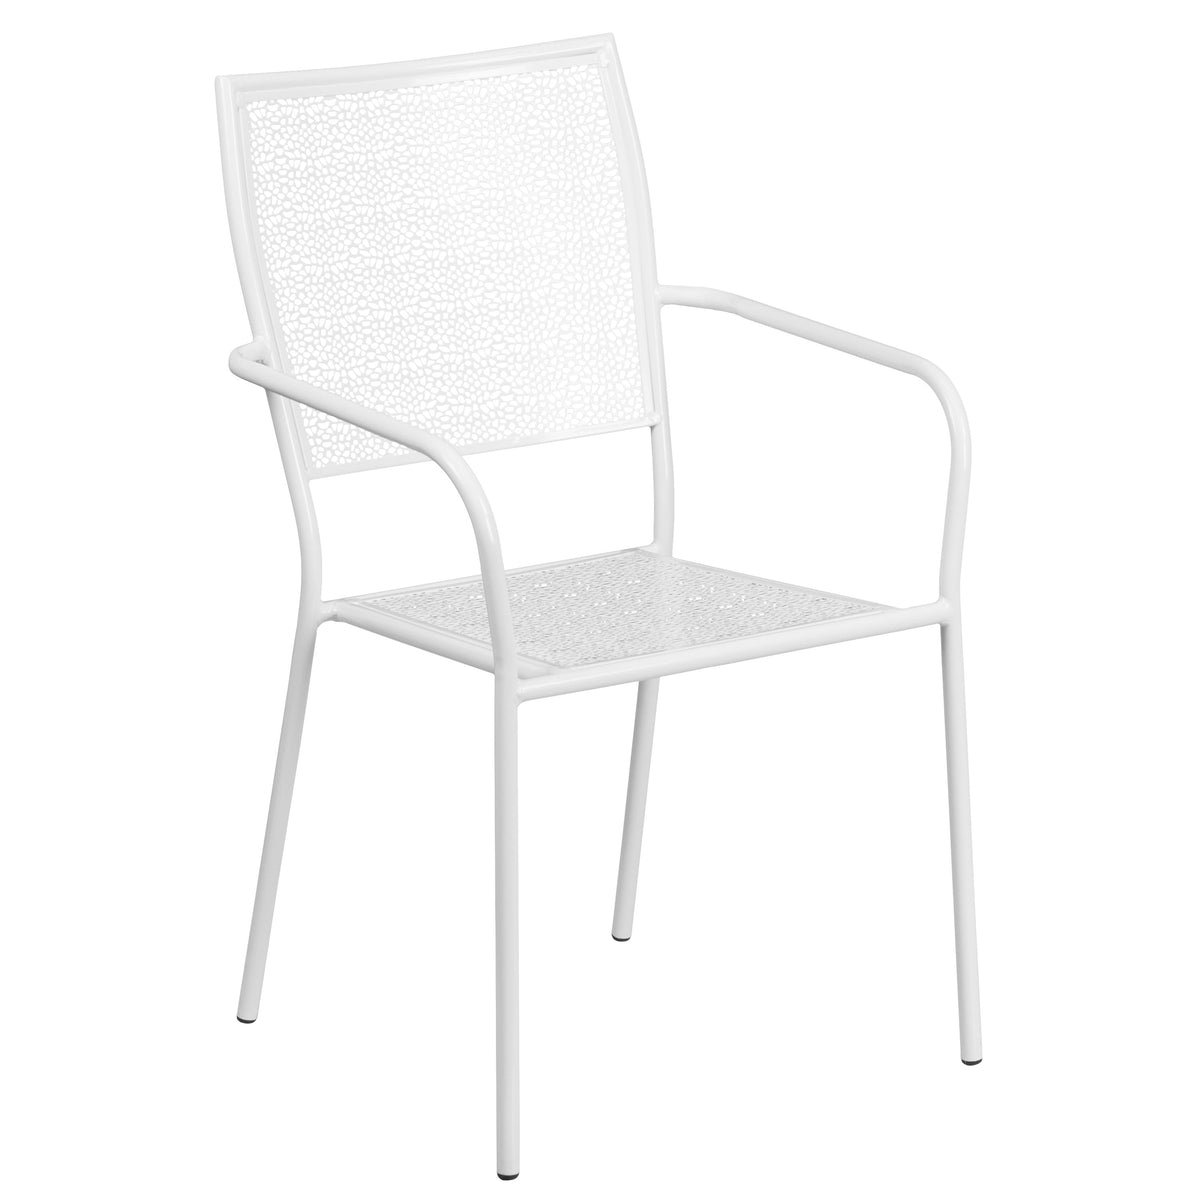 White |#| 28inch Square White Indoor-Outdoor Steel Folding Patio Table Set with 4 Chairs